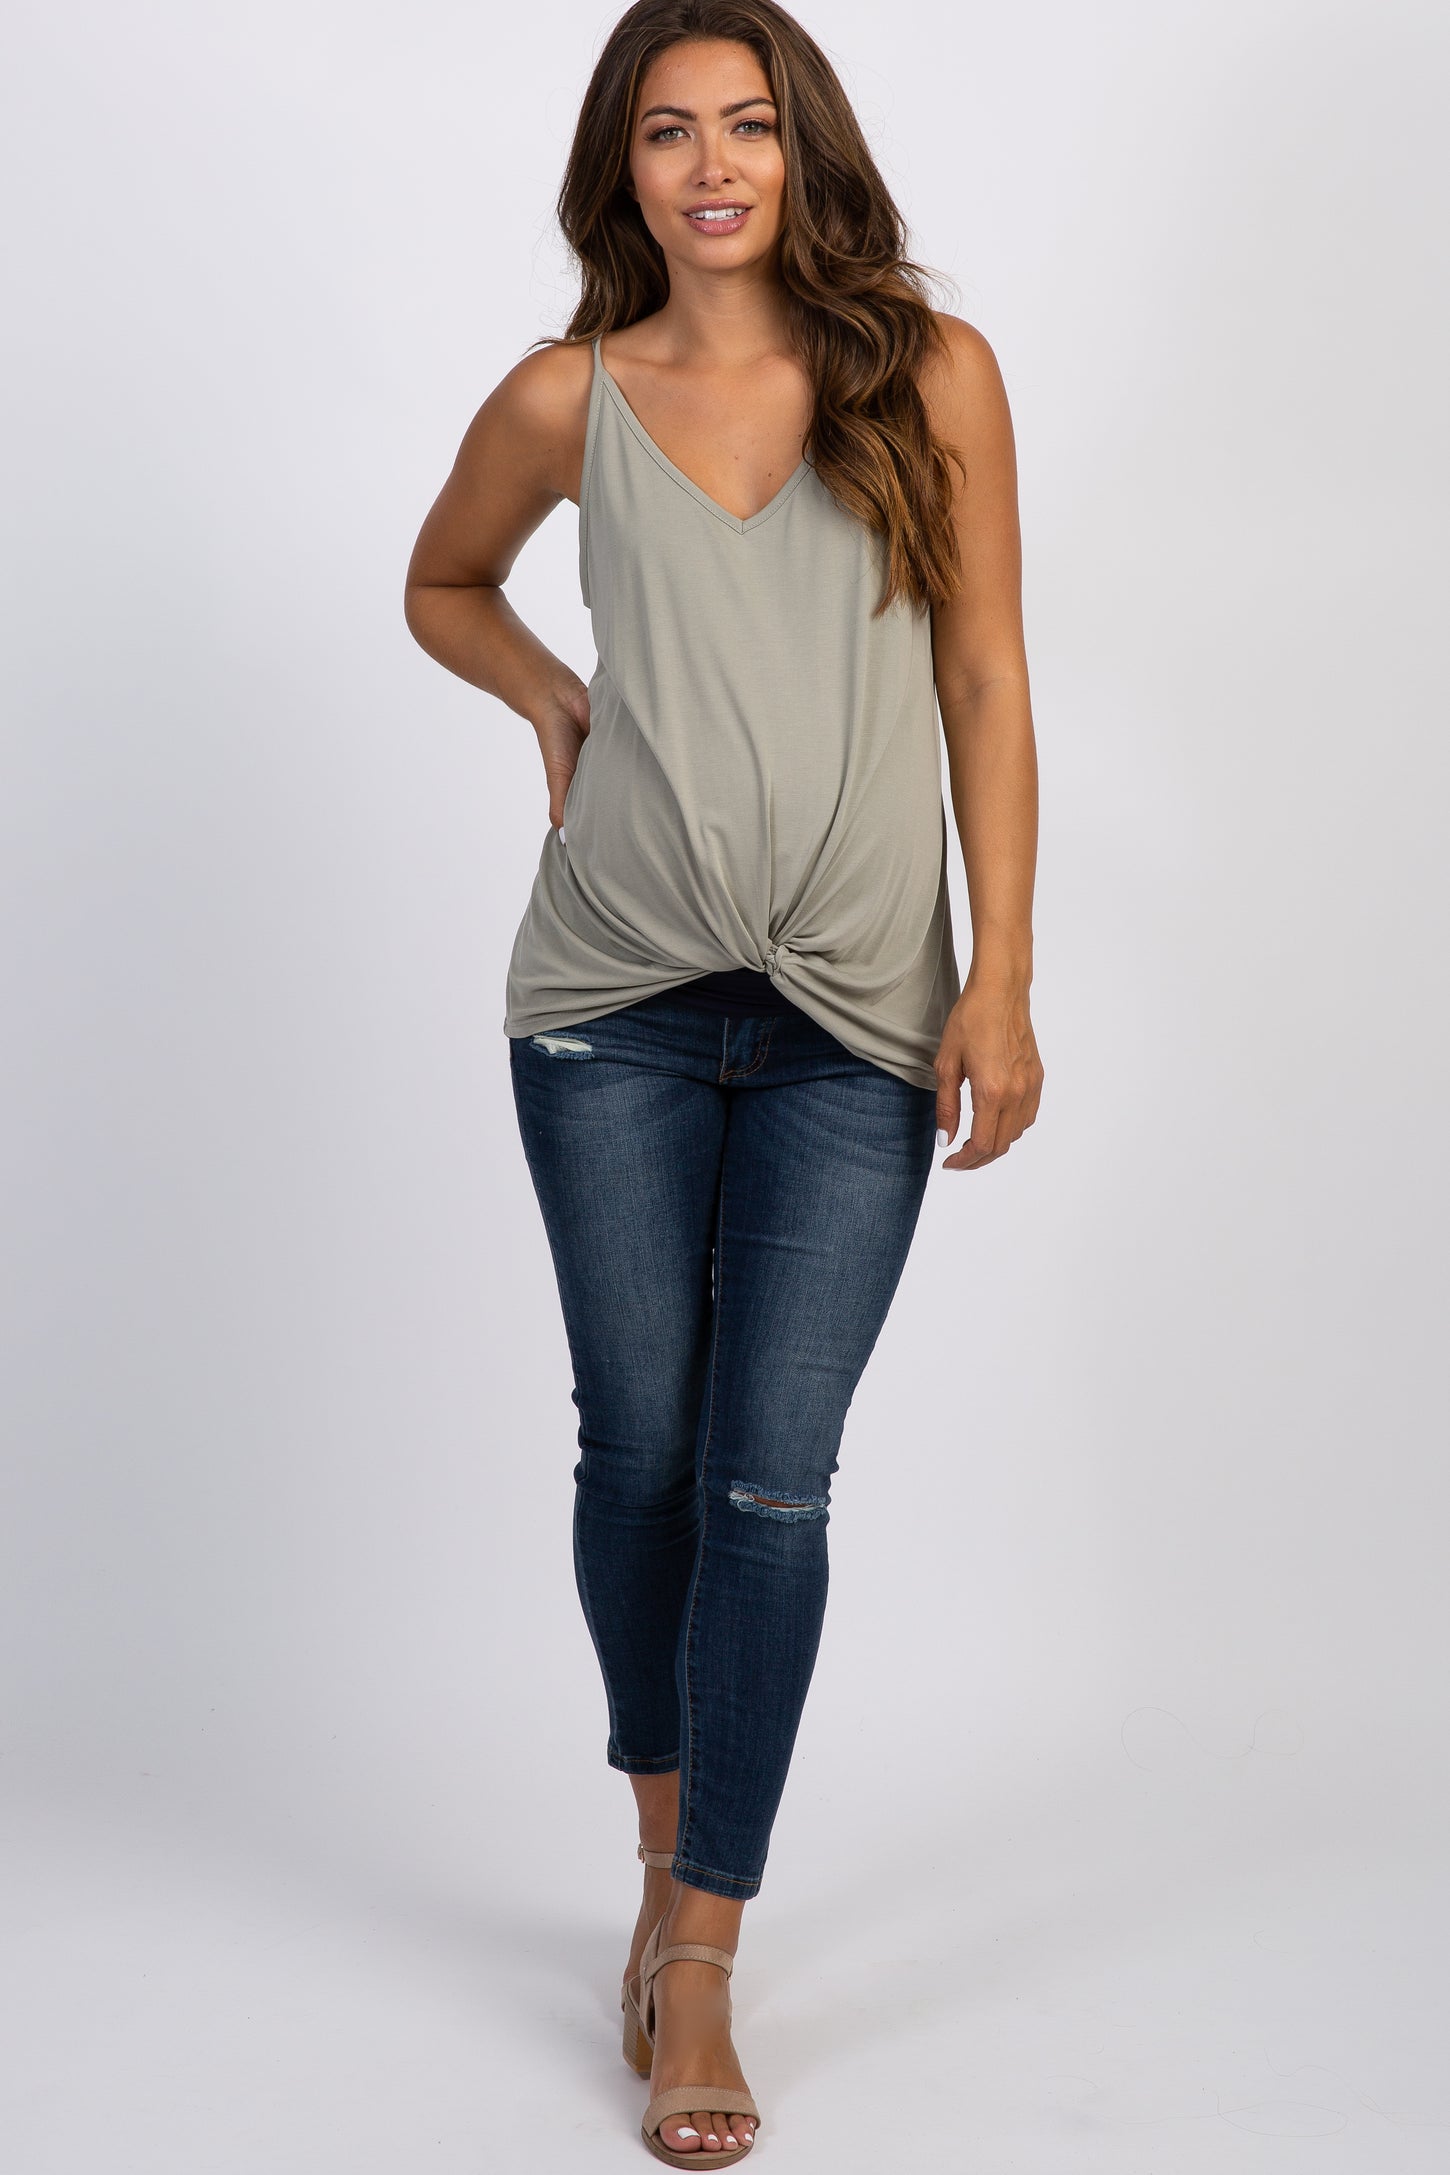 Light Olive Solid Knot Front Cami Strap Maternity Top– PinkBlush